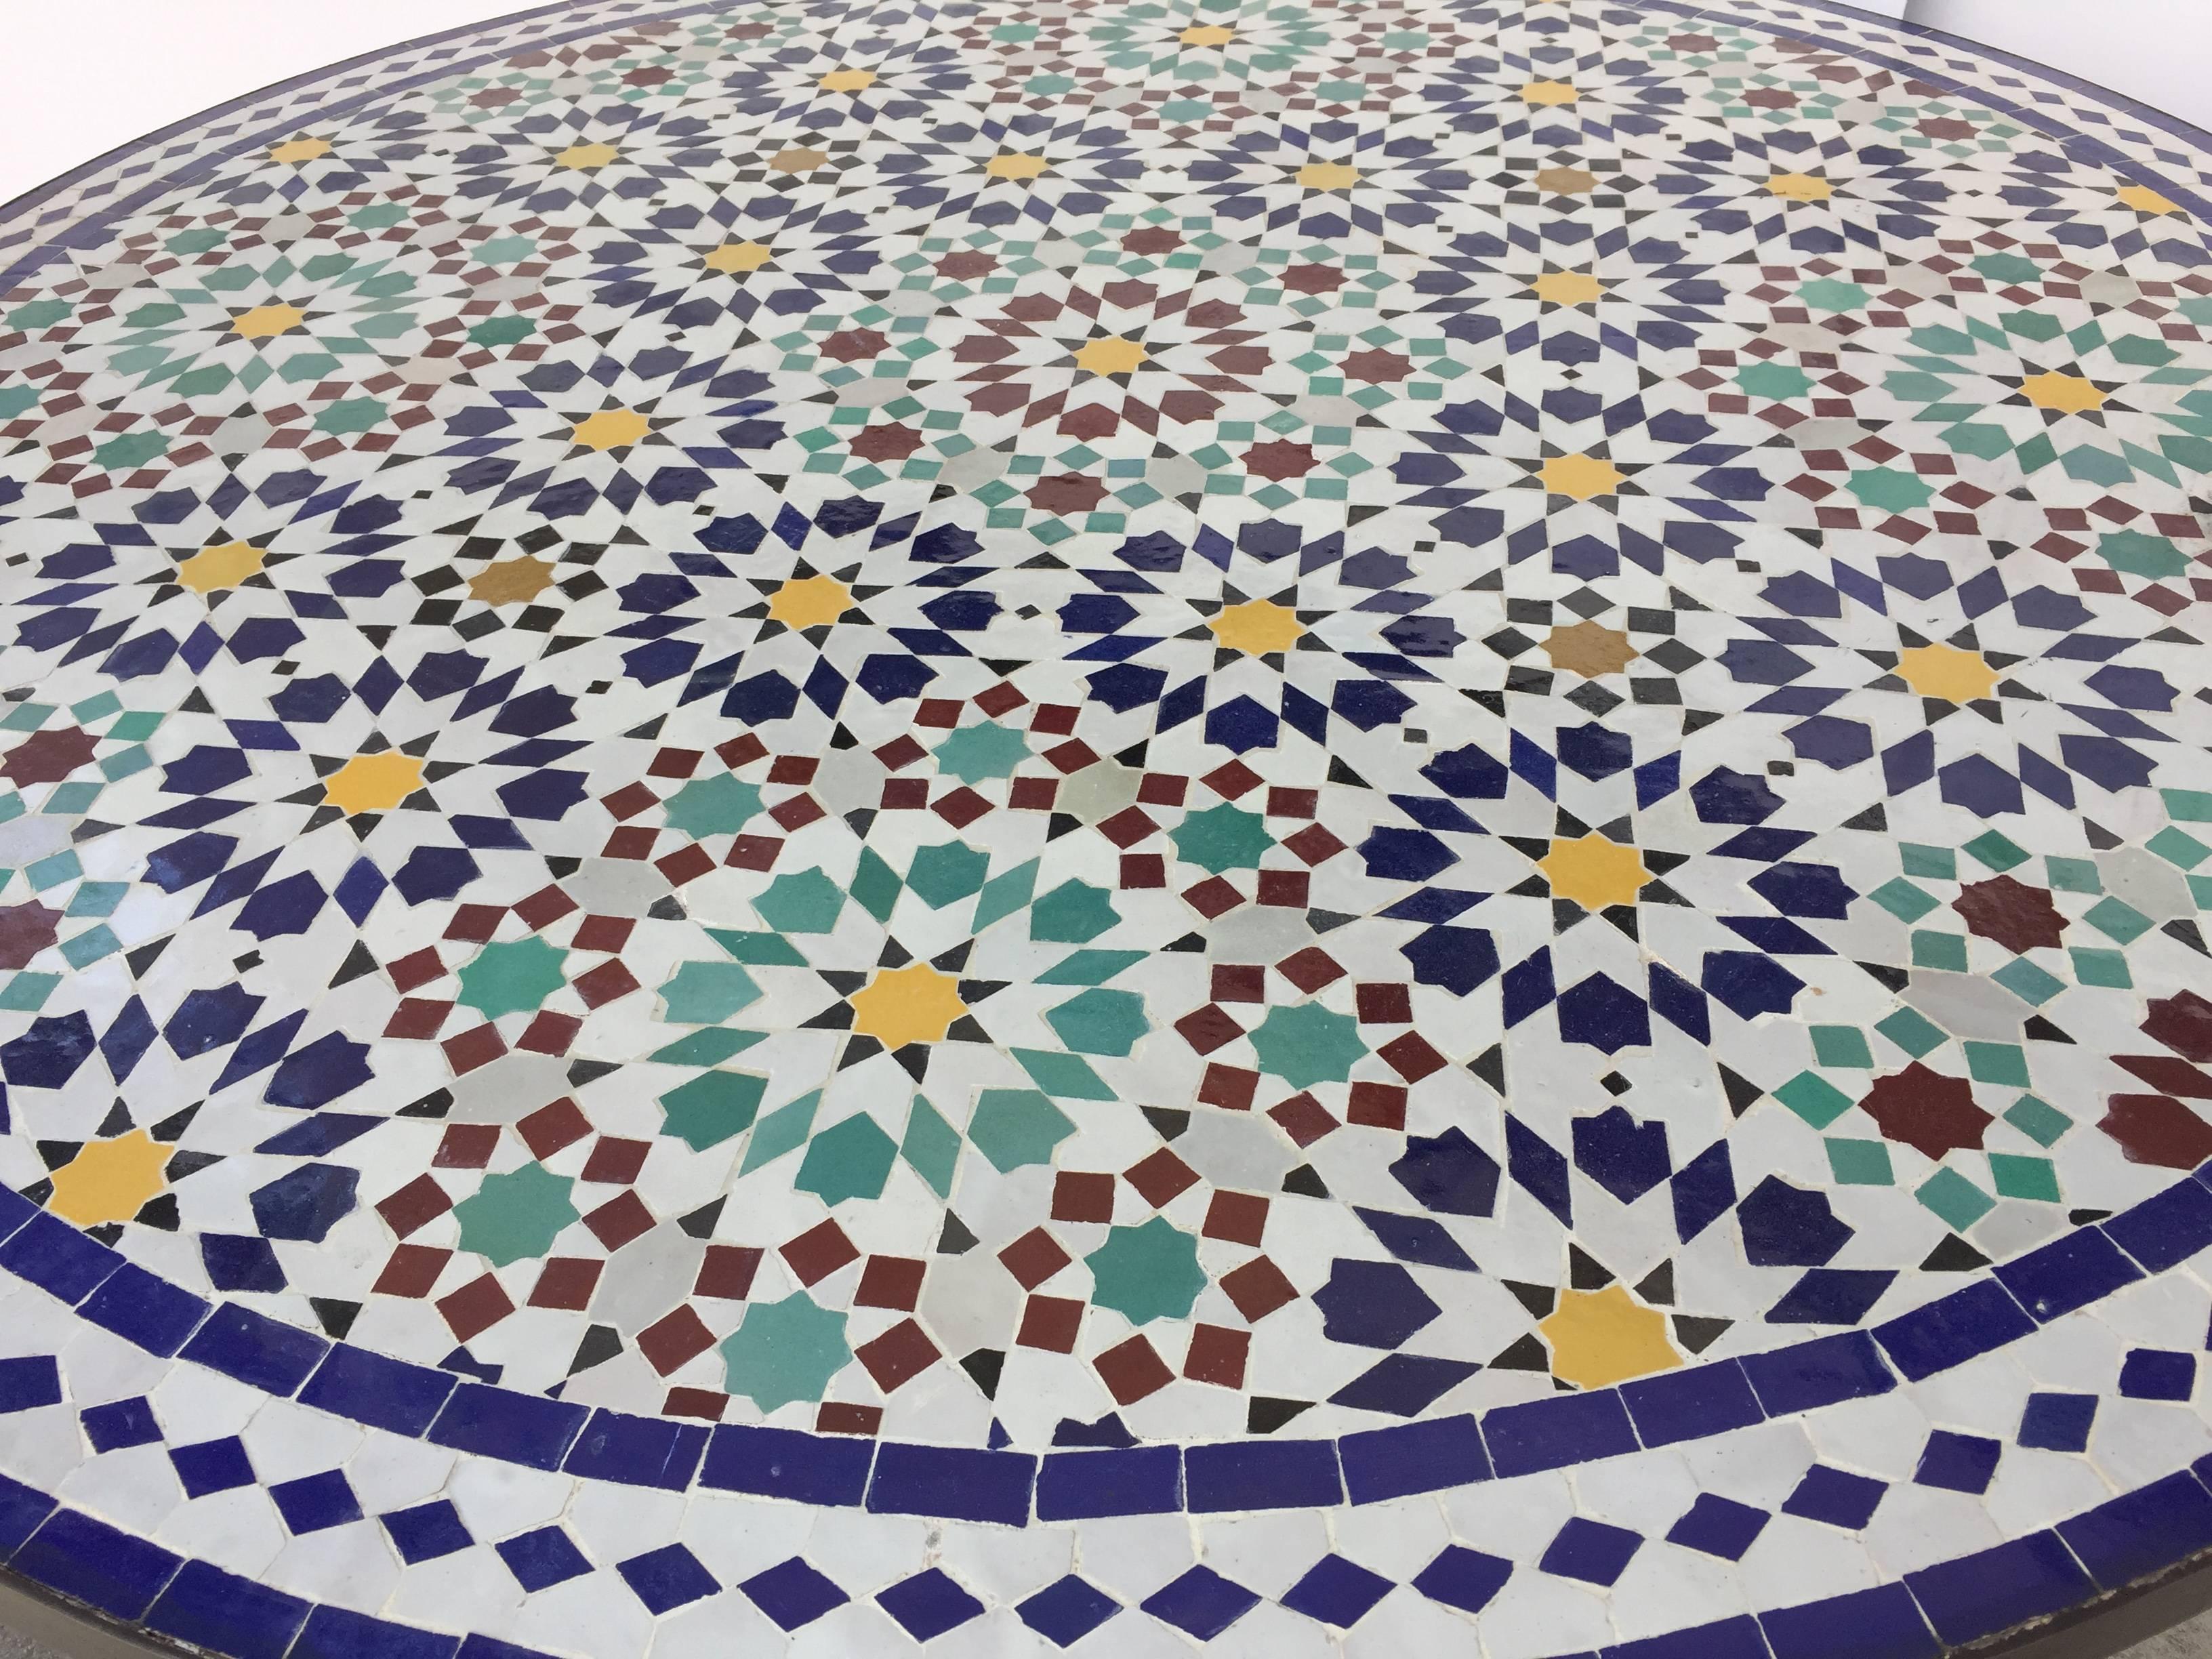 Inlay Moroccan Round Mosaic Outdoor Tile Table in Fez Moorish Design For Sale